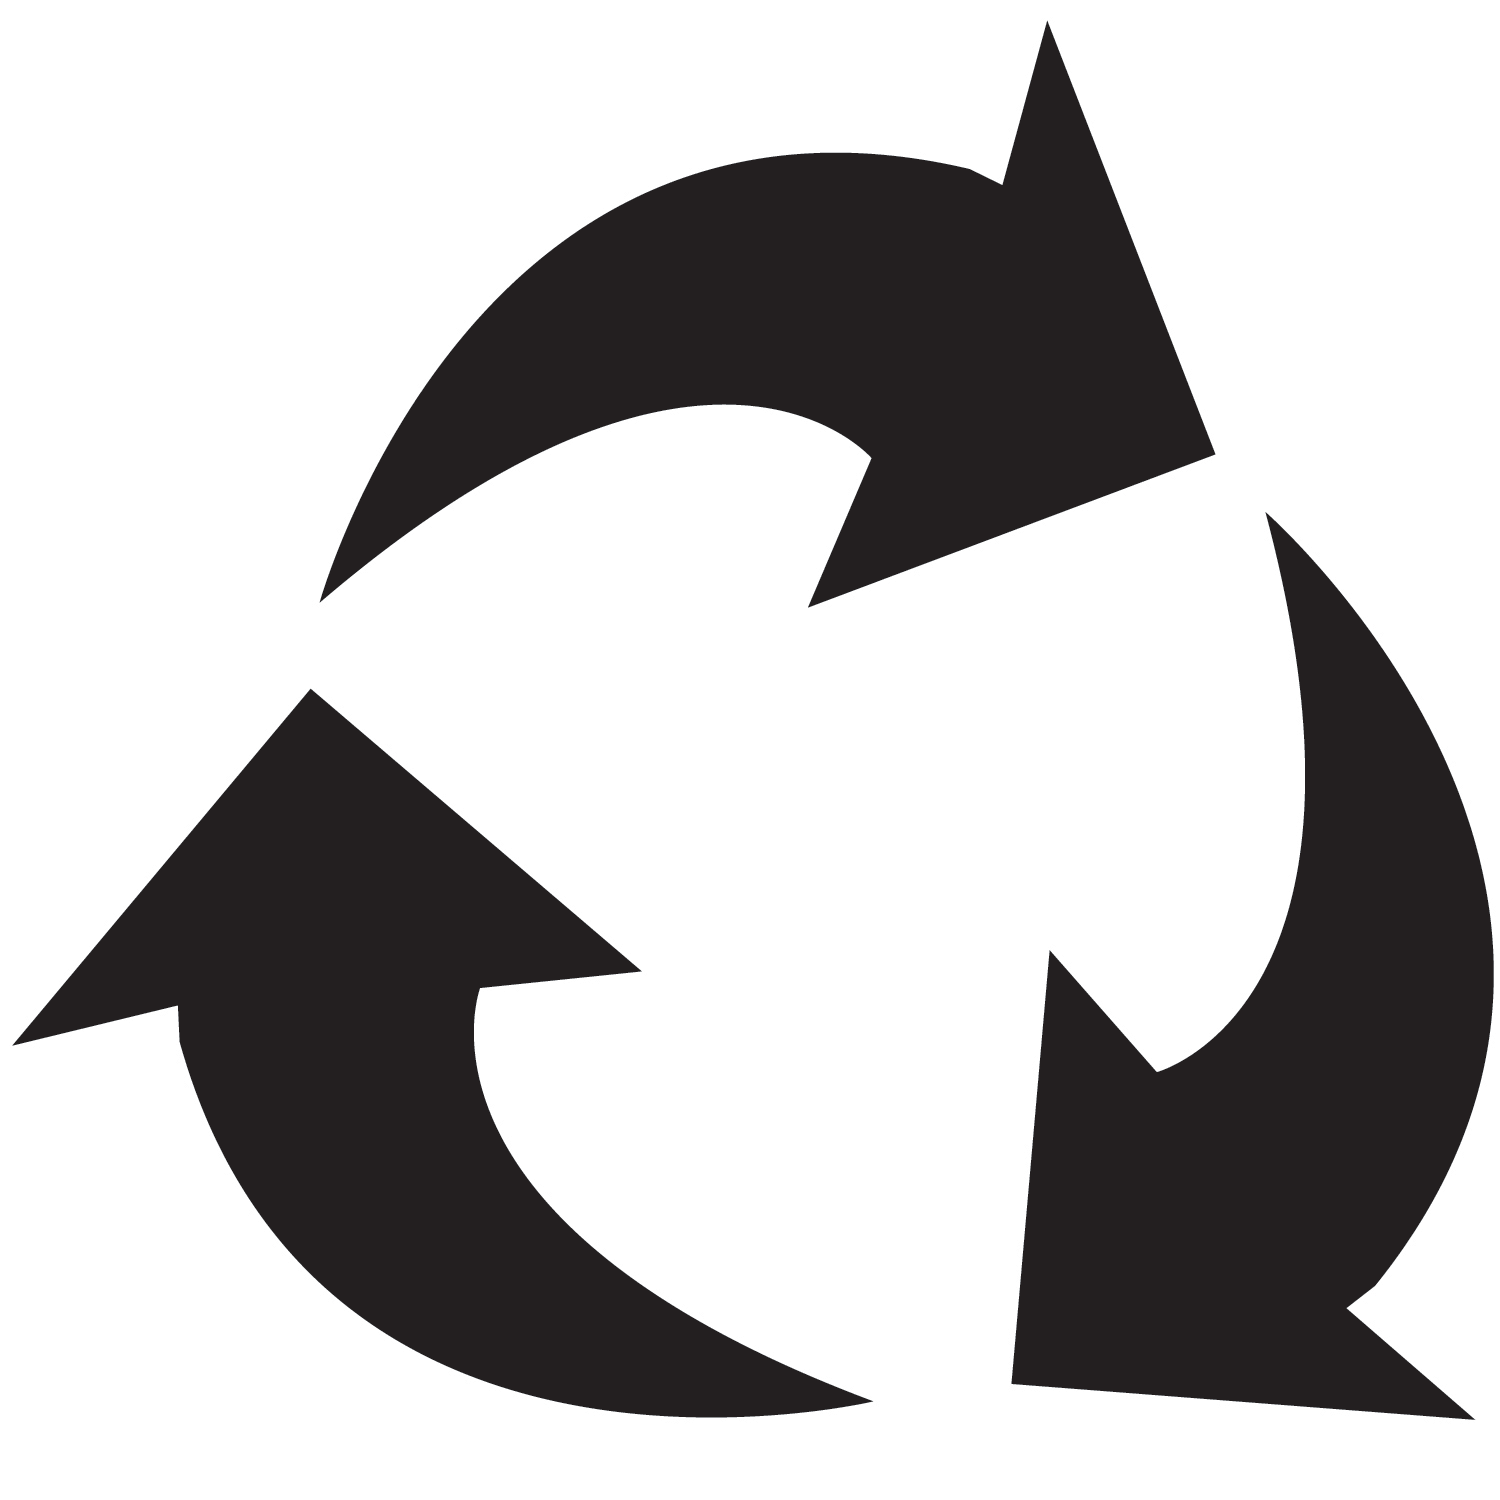 Black Recycle Logo - Free Recycle Logo Png, Download Free Clip Art, Free Clip Art